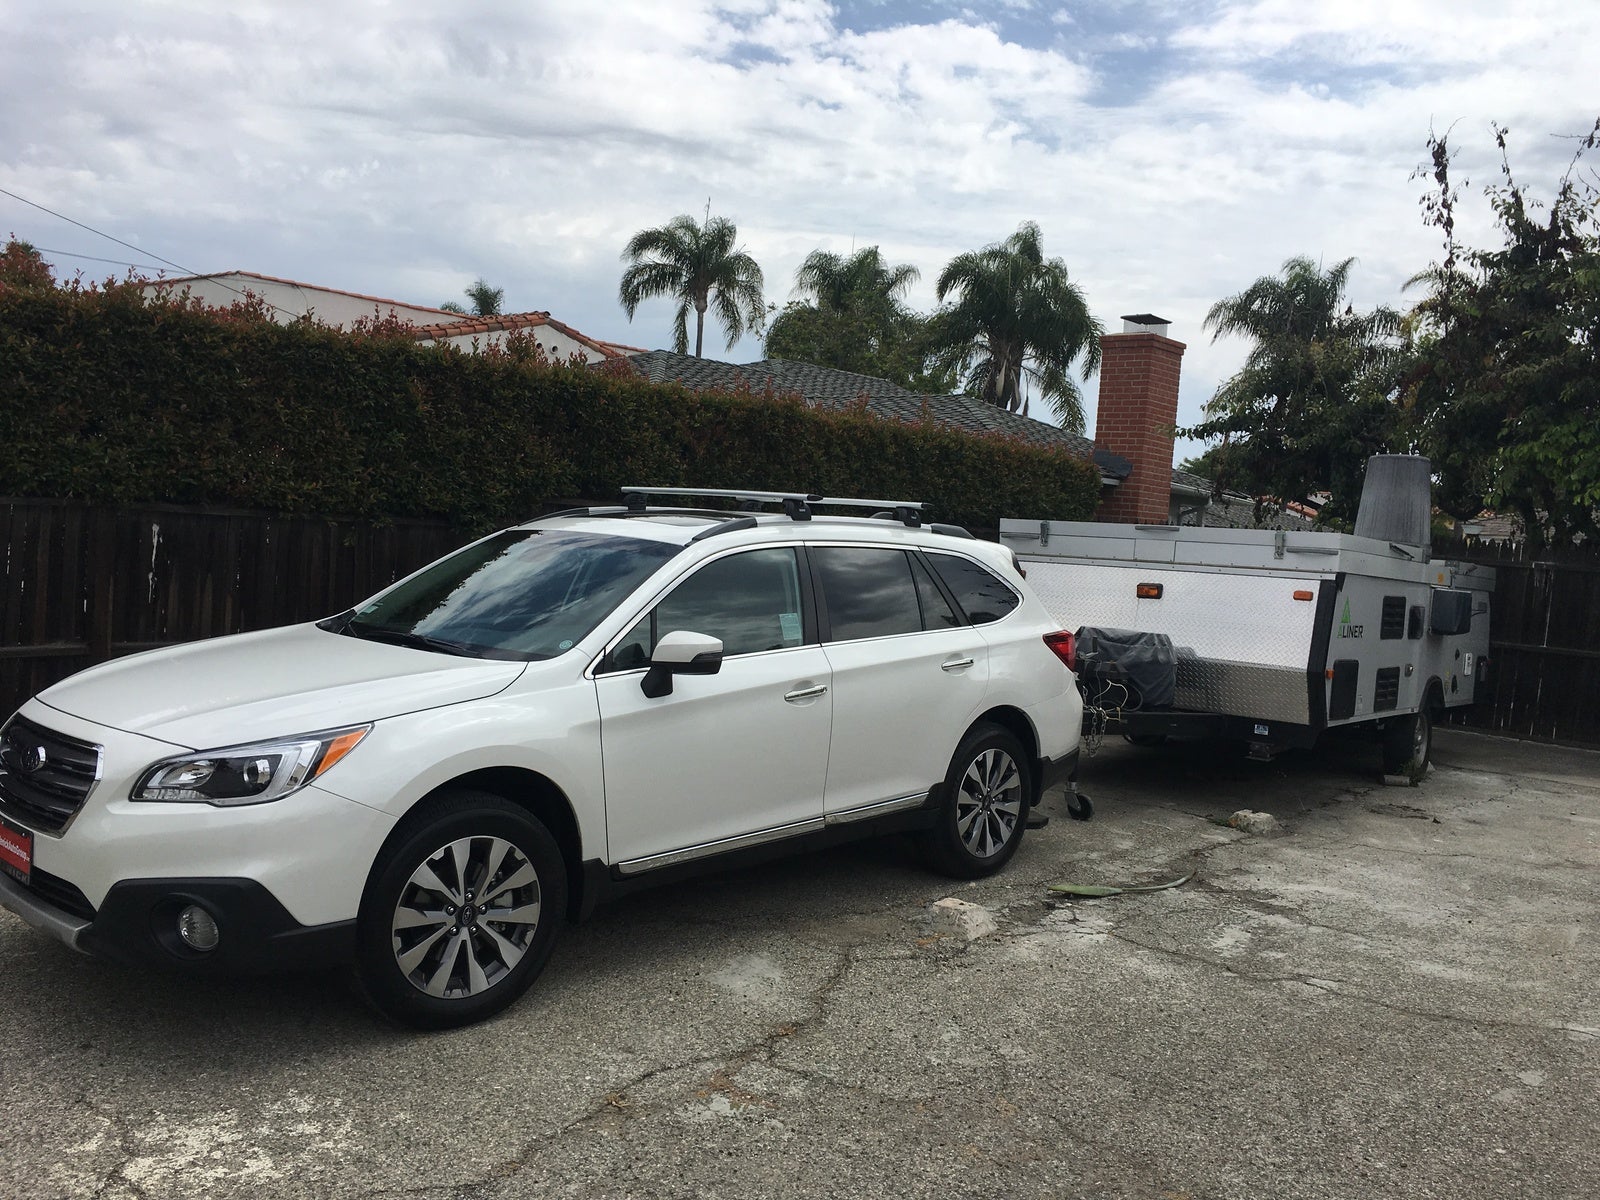 Subaru Outback Questions - Towing with Outback Limited 2.5i, 4 cylinder - CarGurus 2011 Subaru Outback 2.5 I Premium Towing Capacity